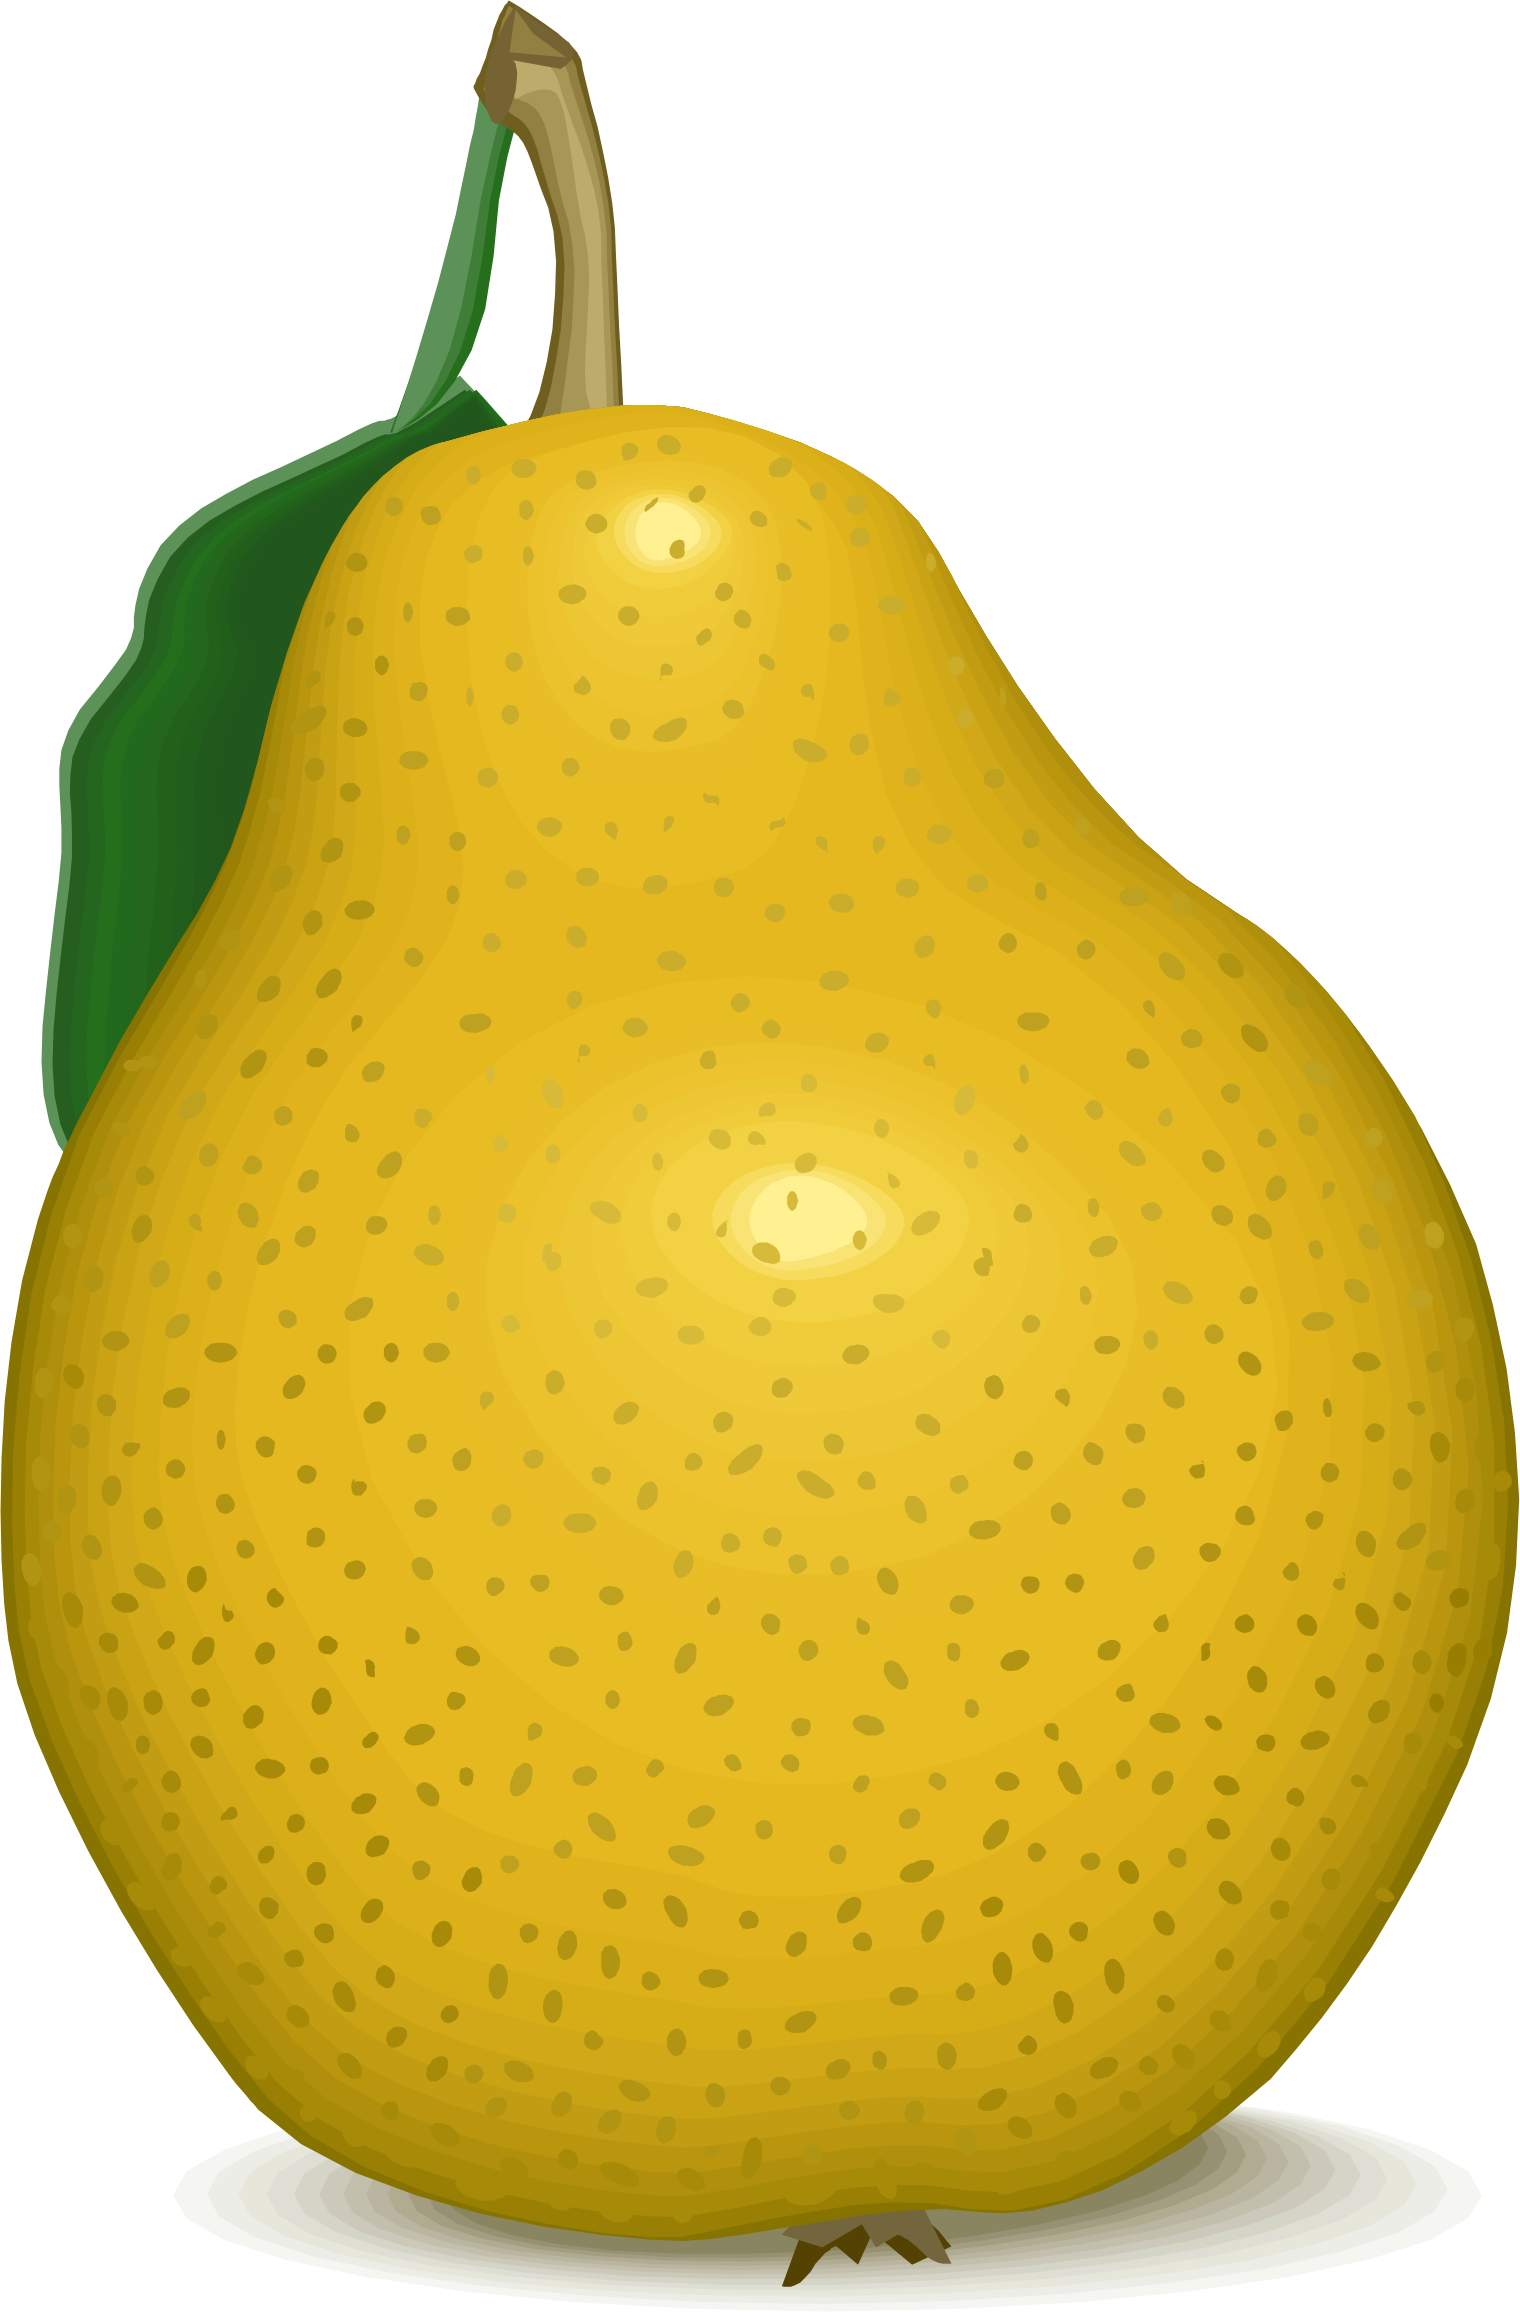 Pear clipart food, Pear food Transparent FREE for download on